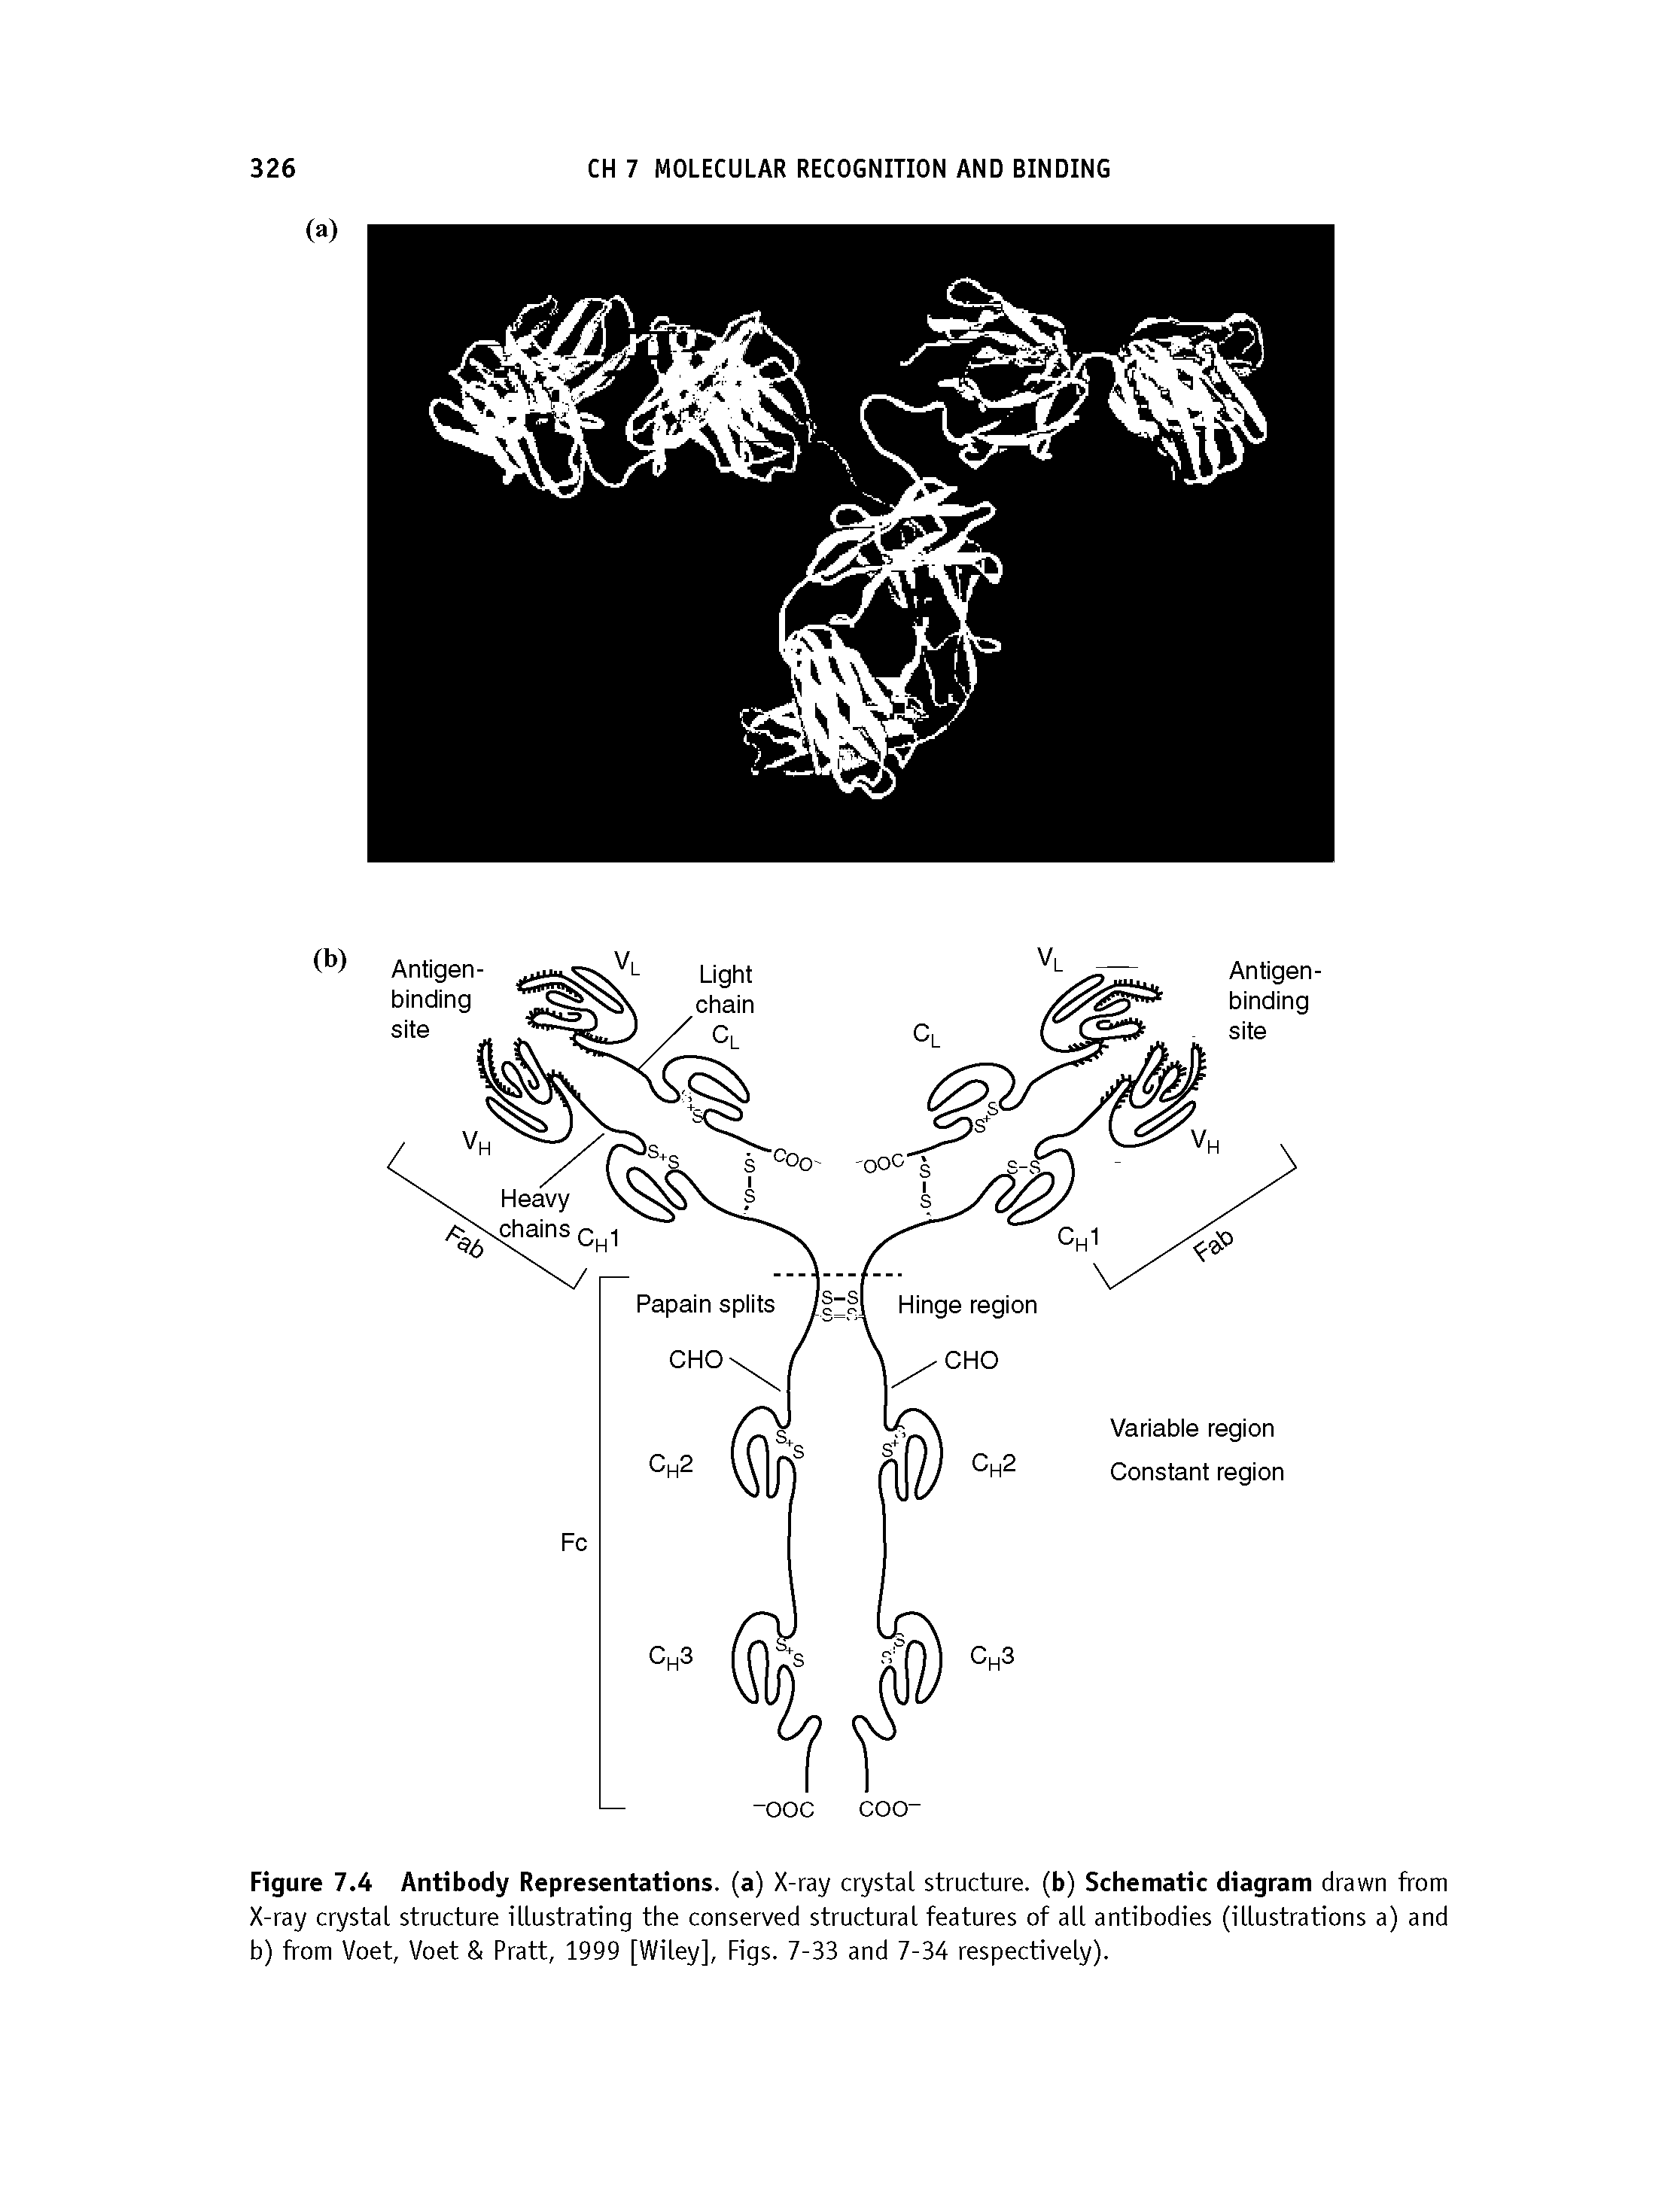 Figure 7.4 Antibody Representations, (a) X-ray crystal structure, (b) Schematic diagram drawn from X-ray crystal structure illustrating the conserved structural features of all antibodies (illustrations a) and b) from Voet, Voet Pratt, 1999 [Wiley], Figs. 7-33 and 7-34 respectively).